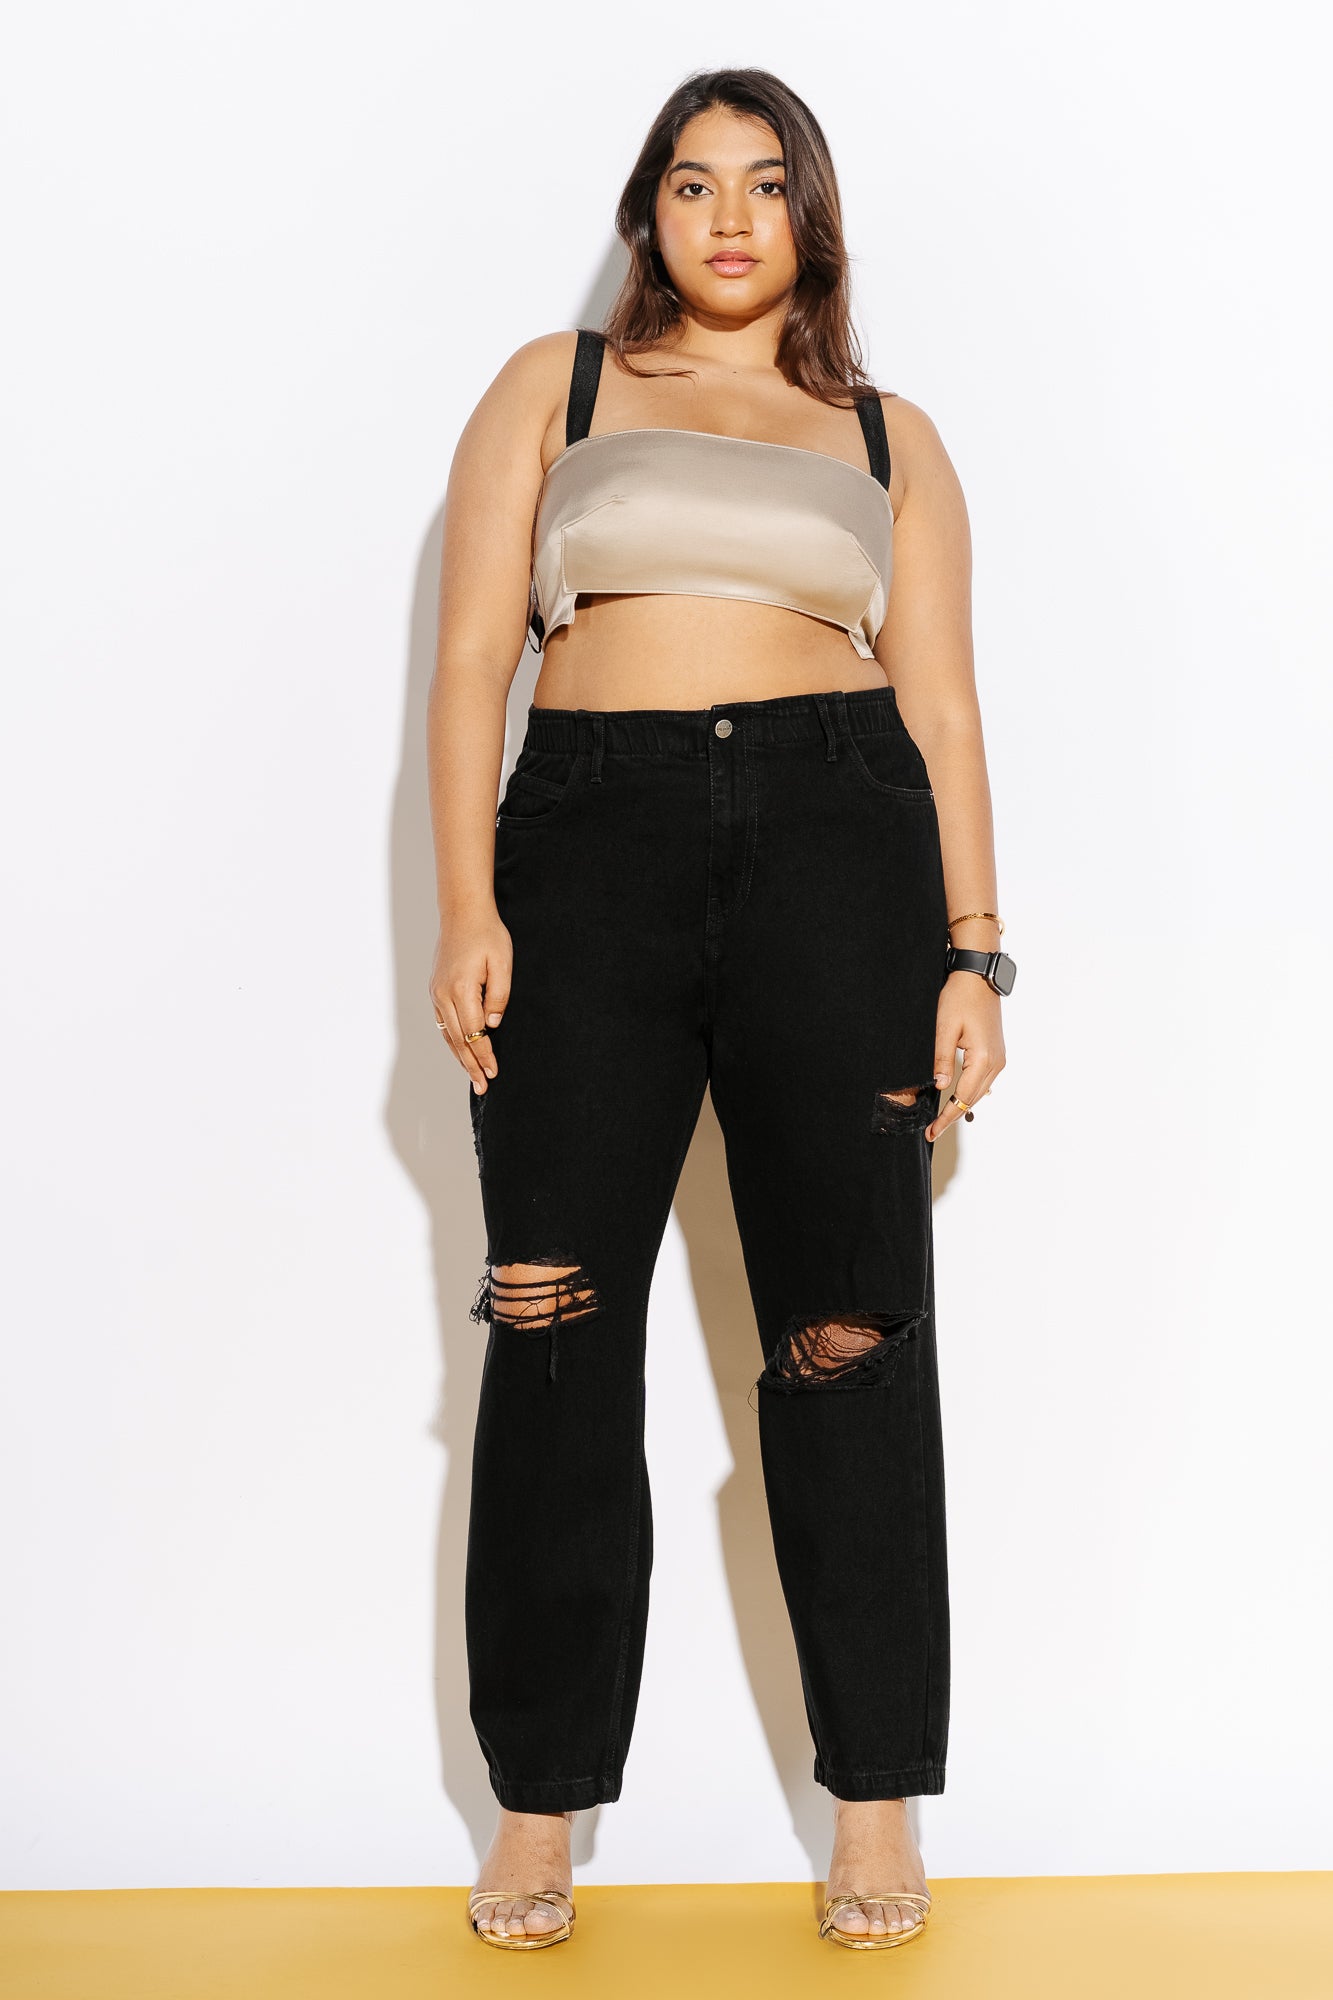 Shop the Latest Mom Jeans for Women Online